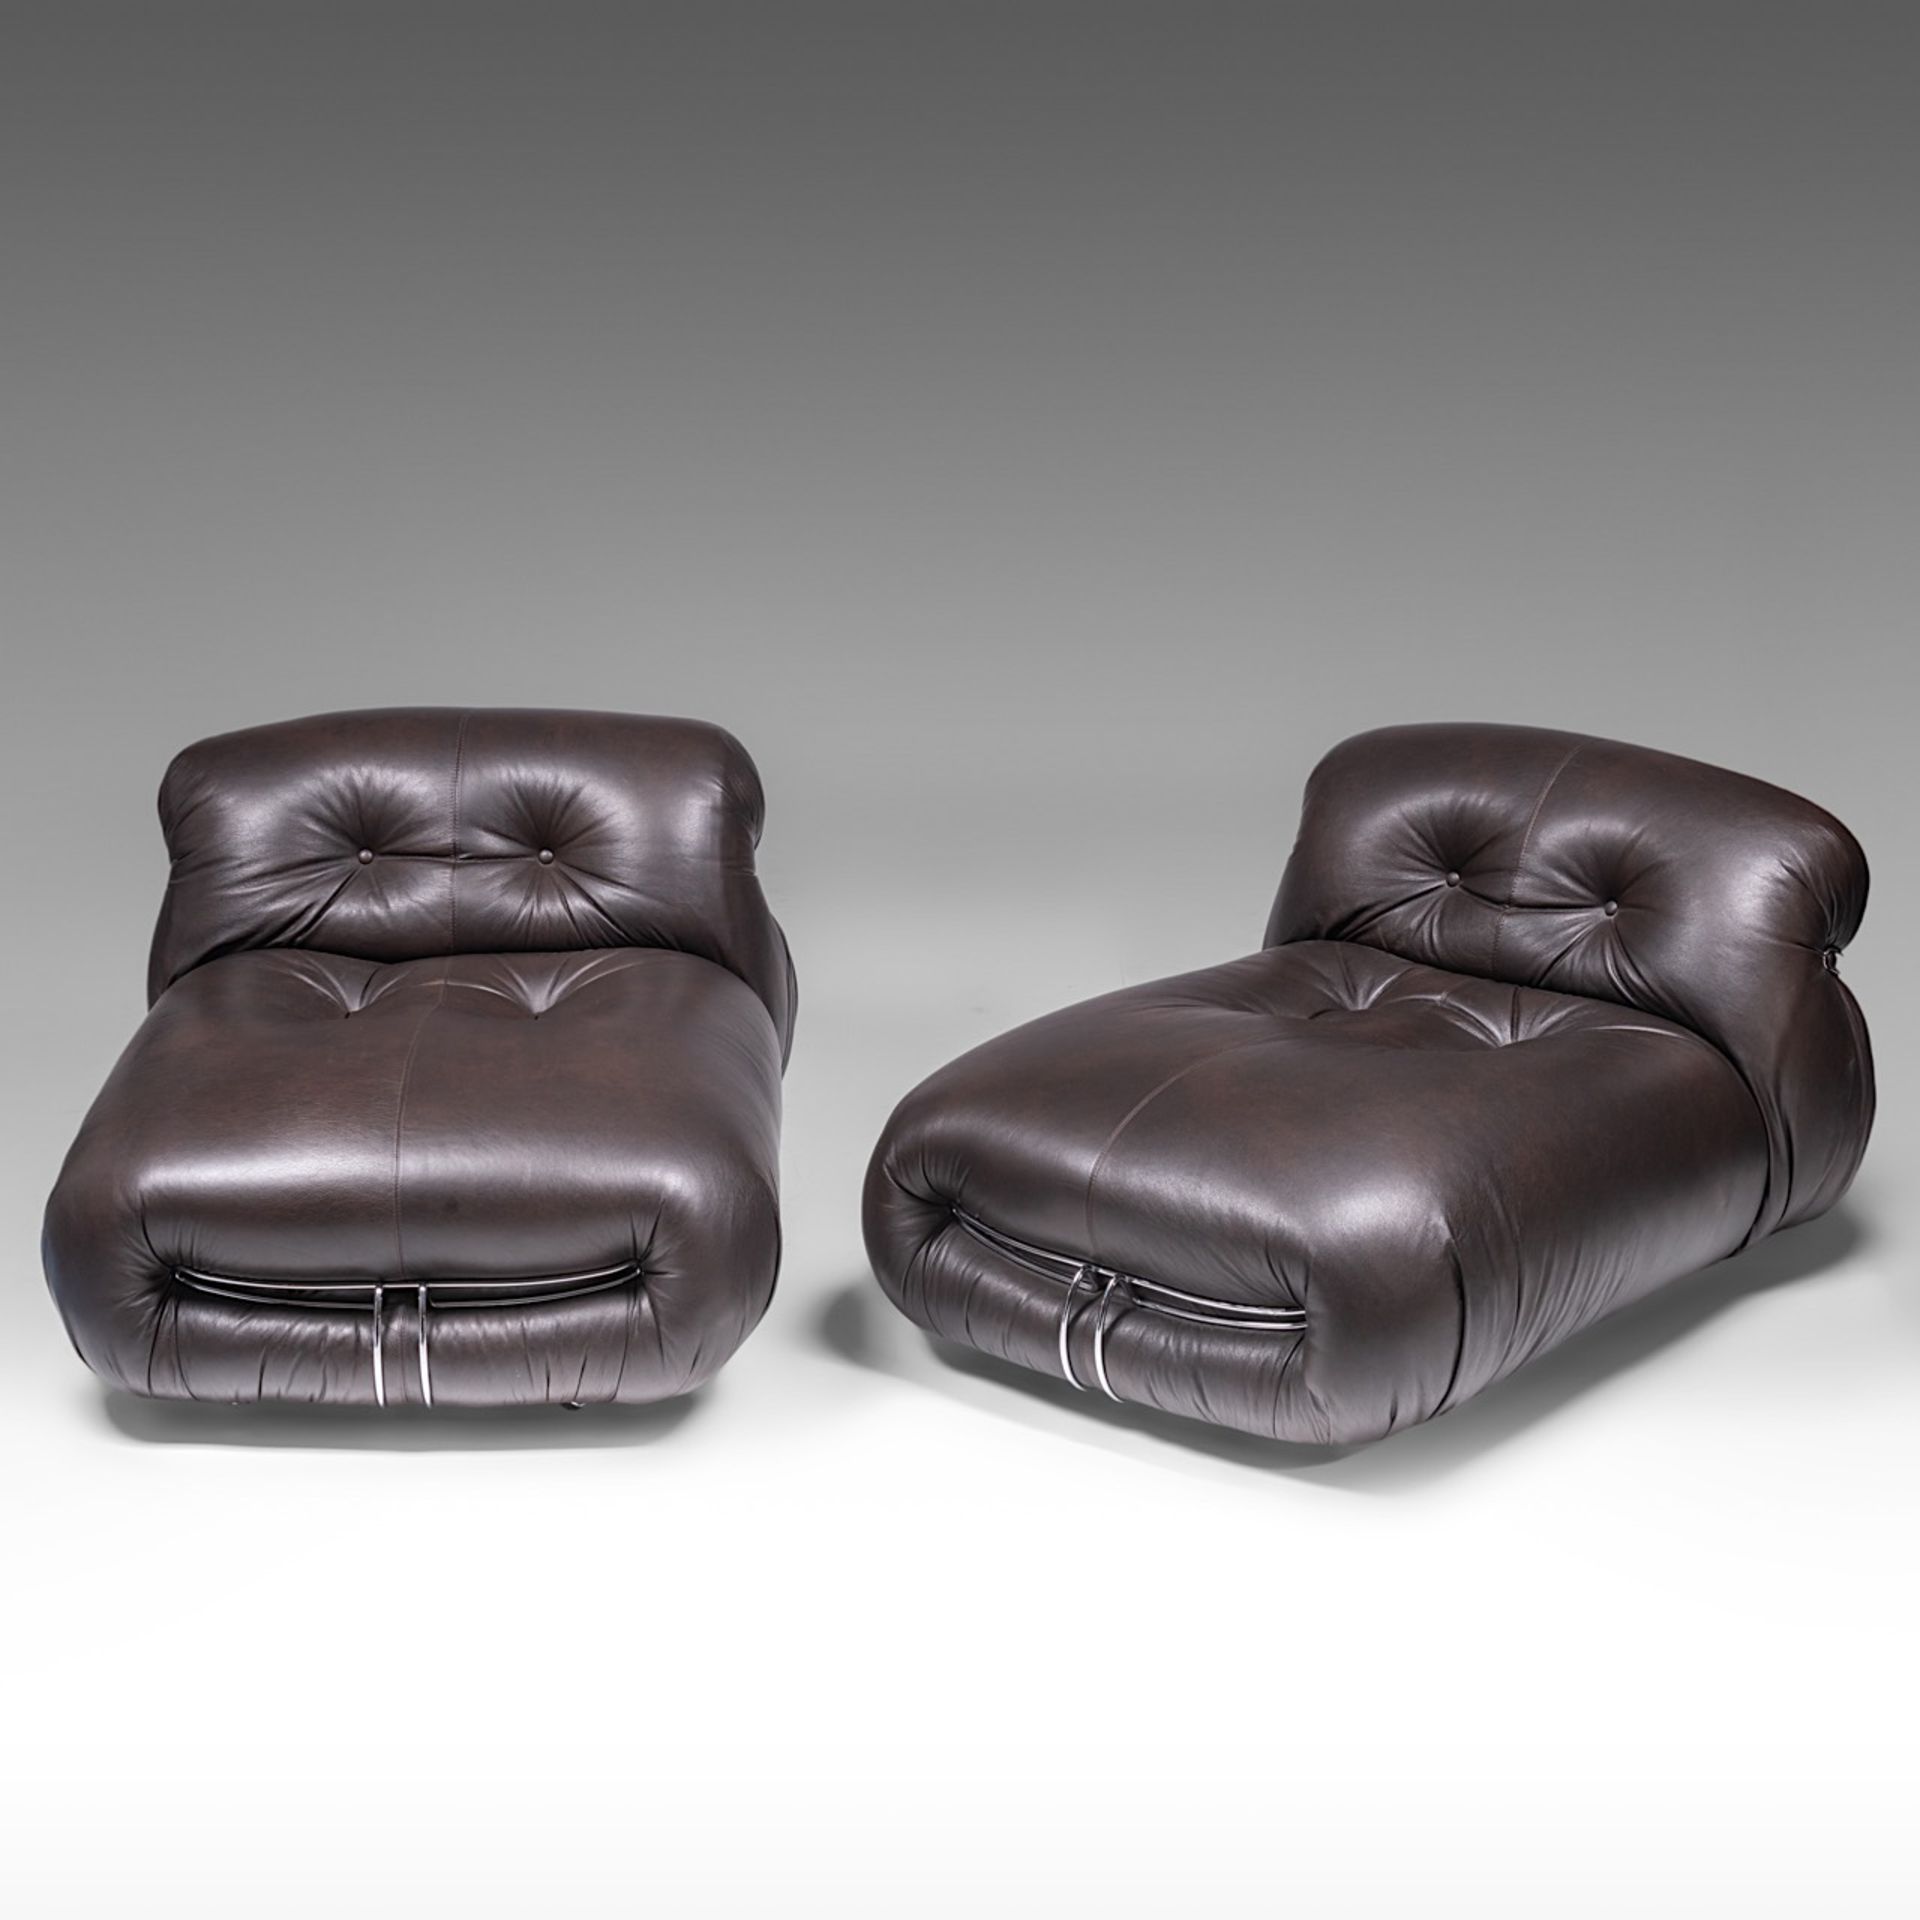 Two Soriana chaise-longues in brown leather and chrome by Afra & Tobia Scarpa for Cassina - Image 2 of 8